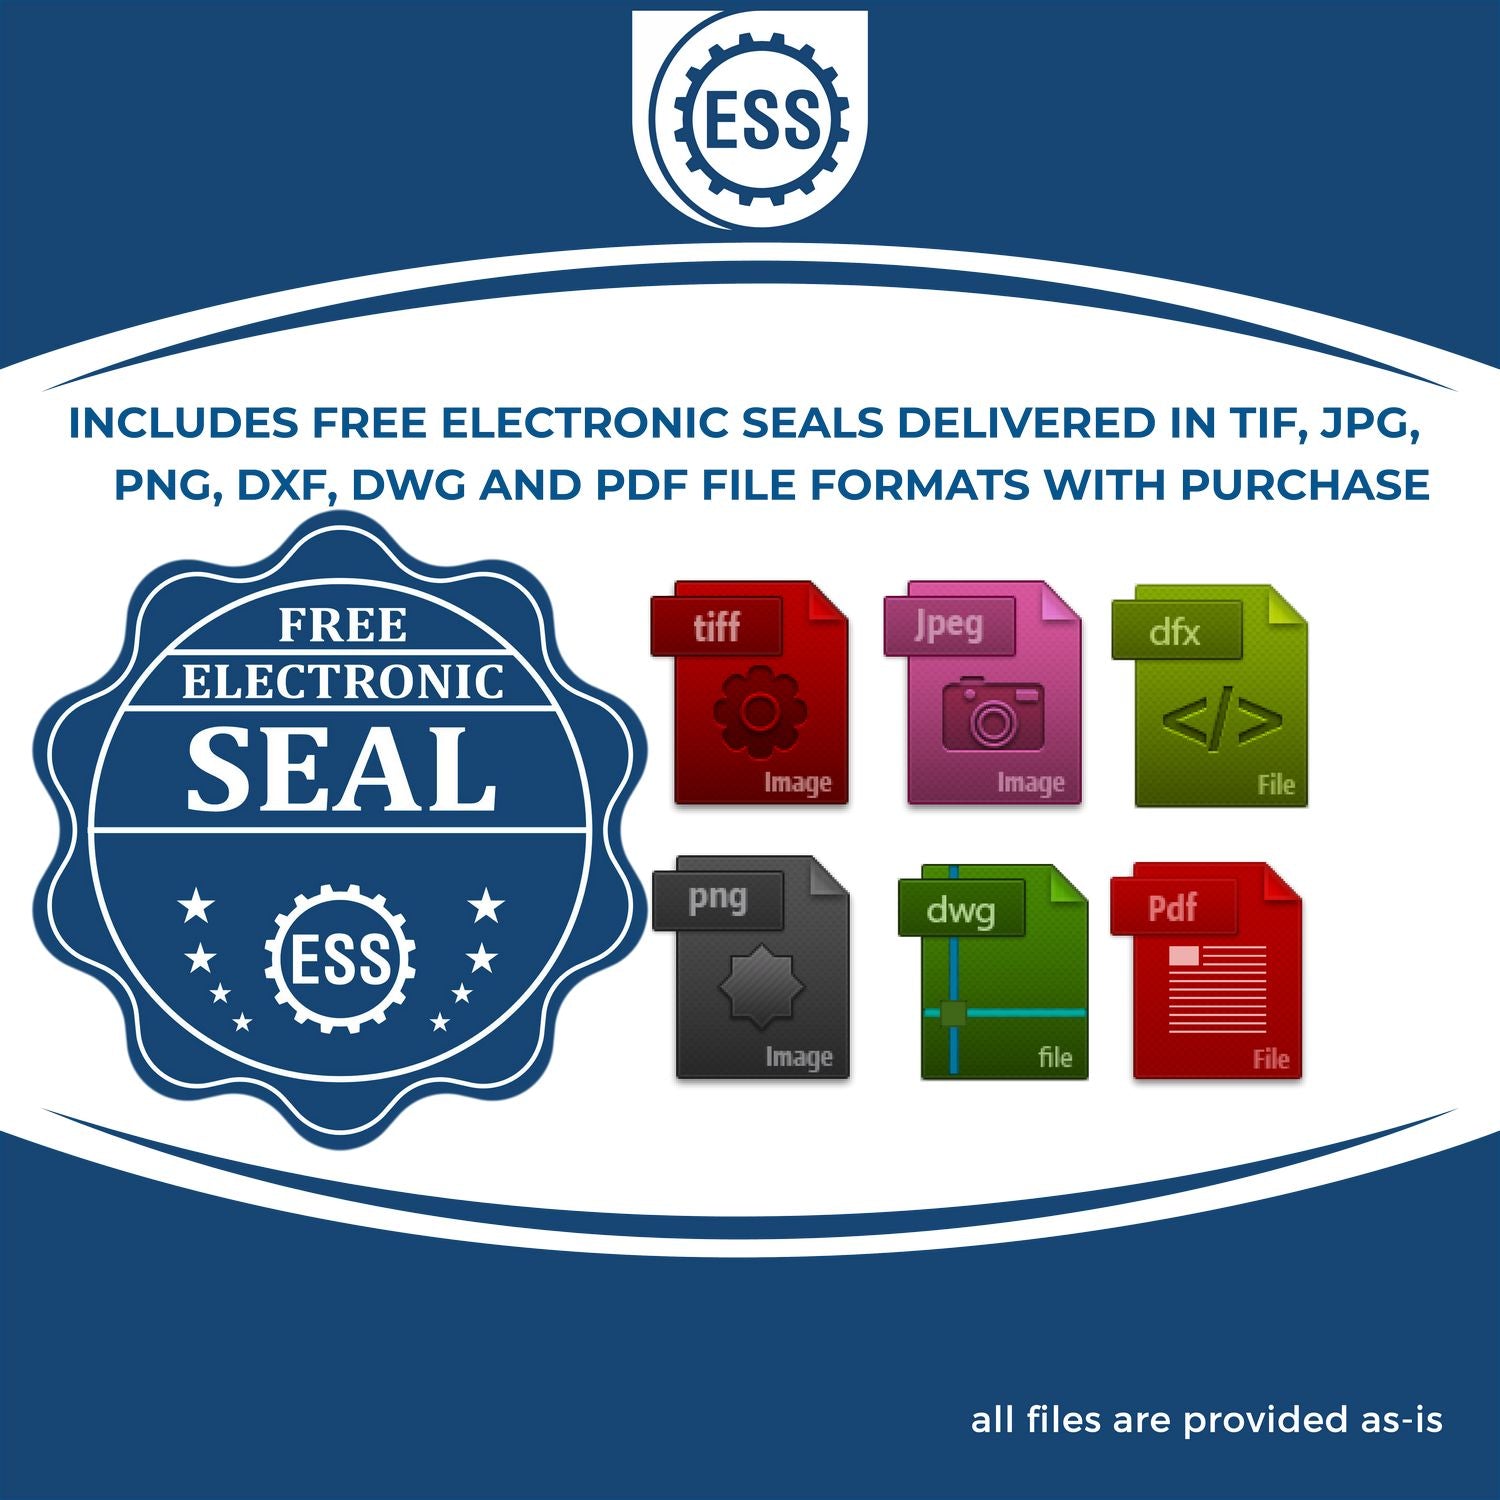 An infographic for the free electronic seal for the Premium MaxLight Pre-Inked Florida Landscape Architectural Stamp illustrating the different file type icons such as DXF, DWG, TIF, JPG and PNG.